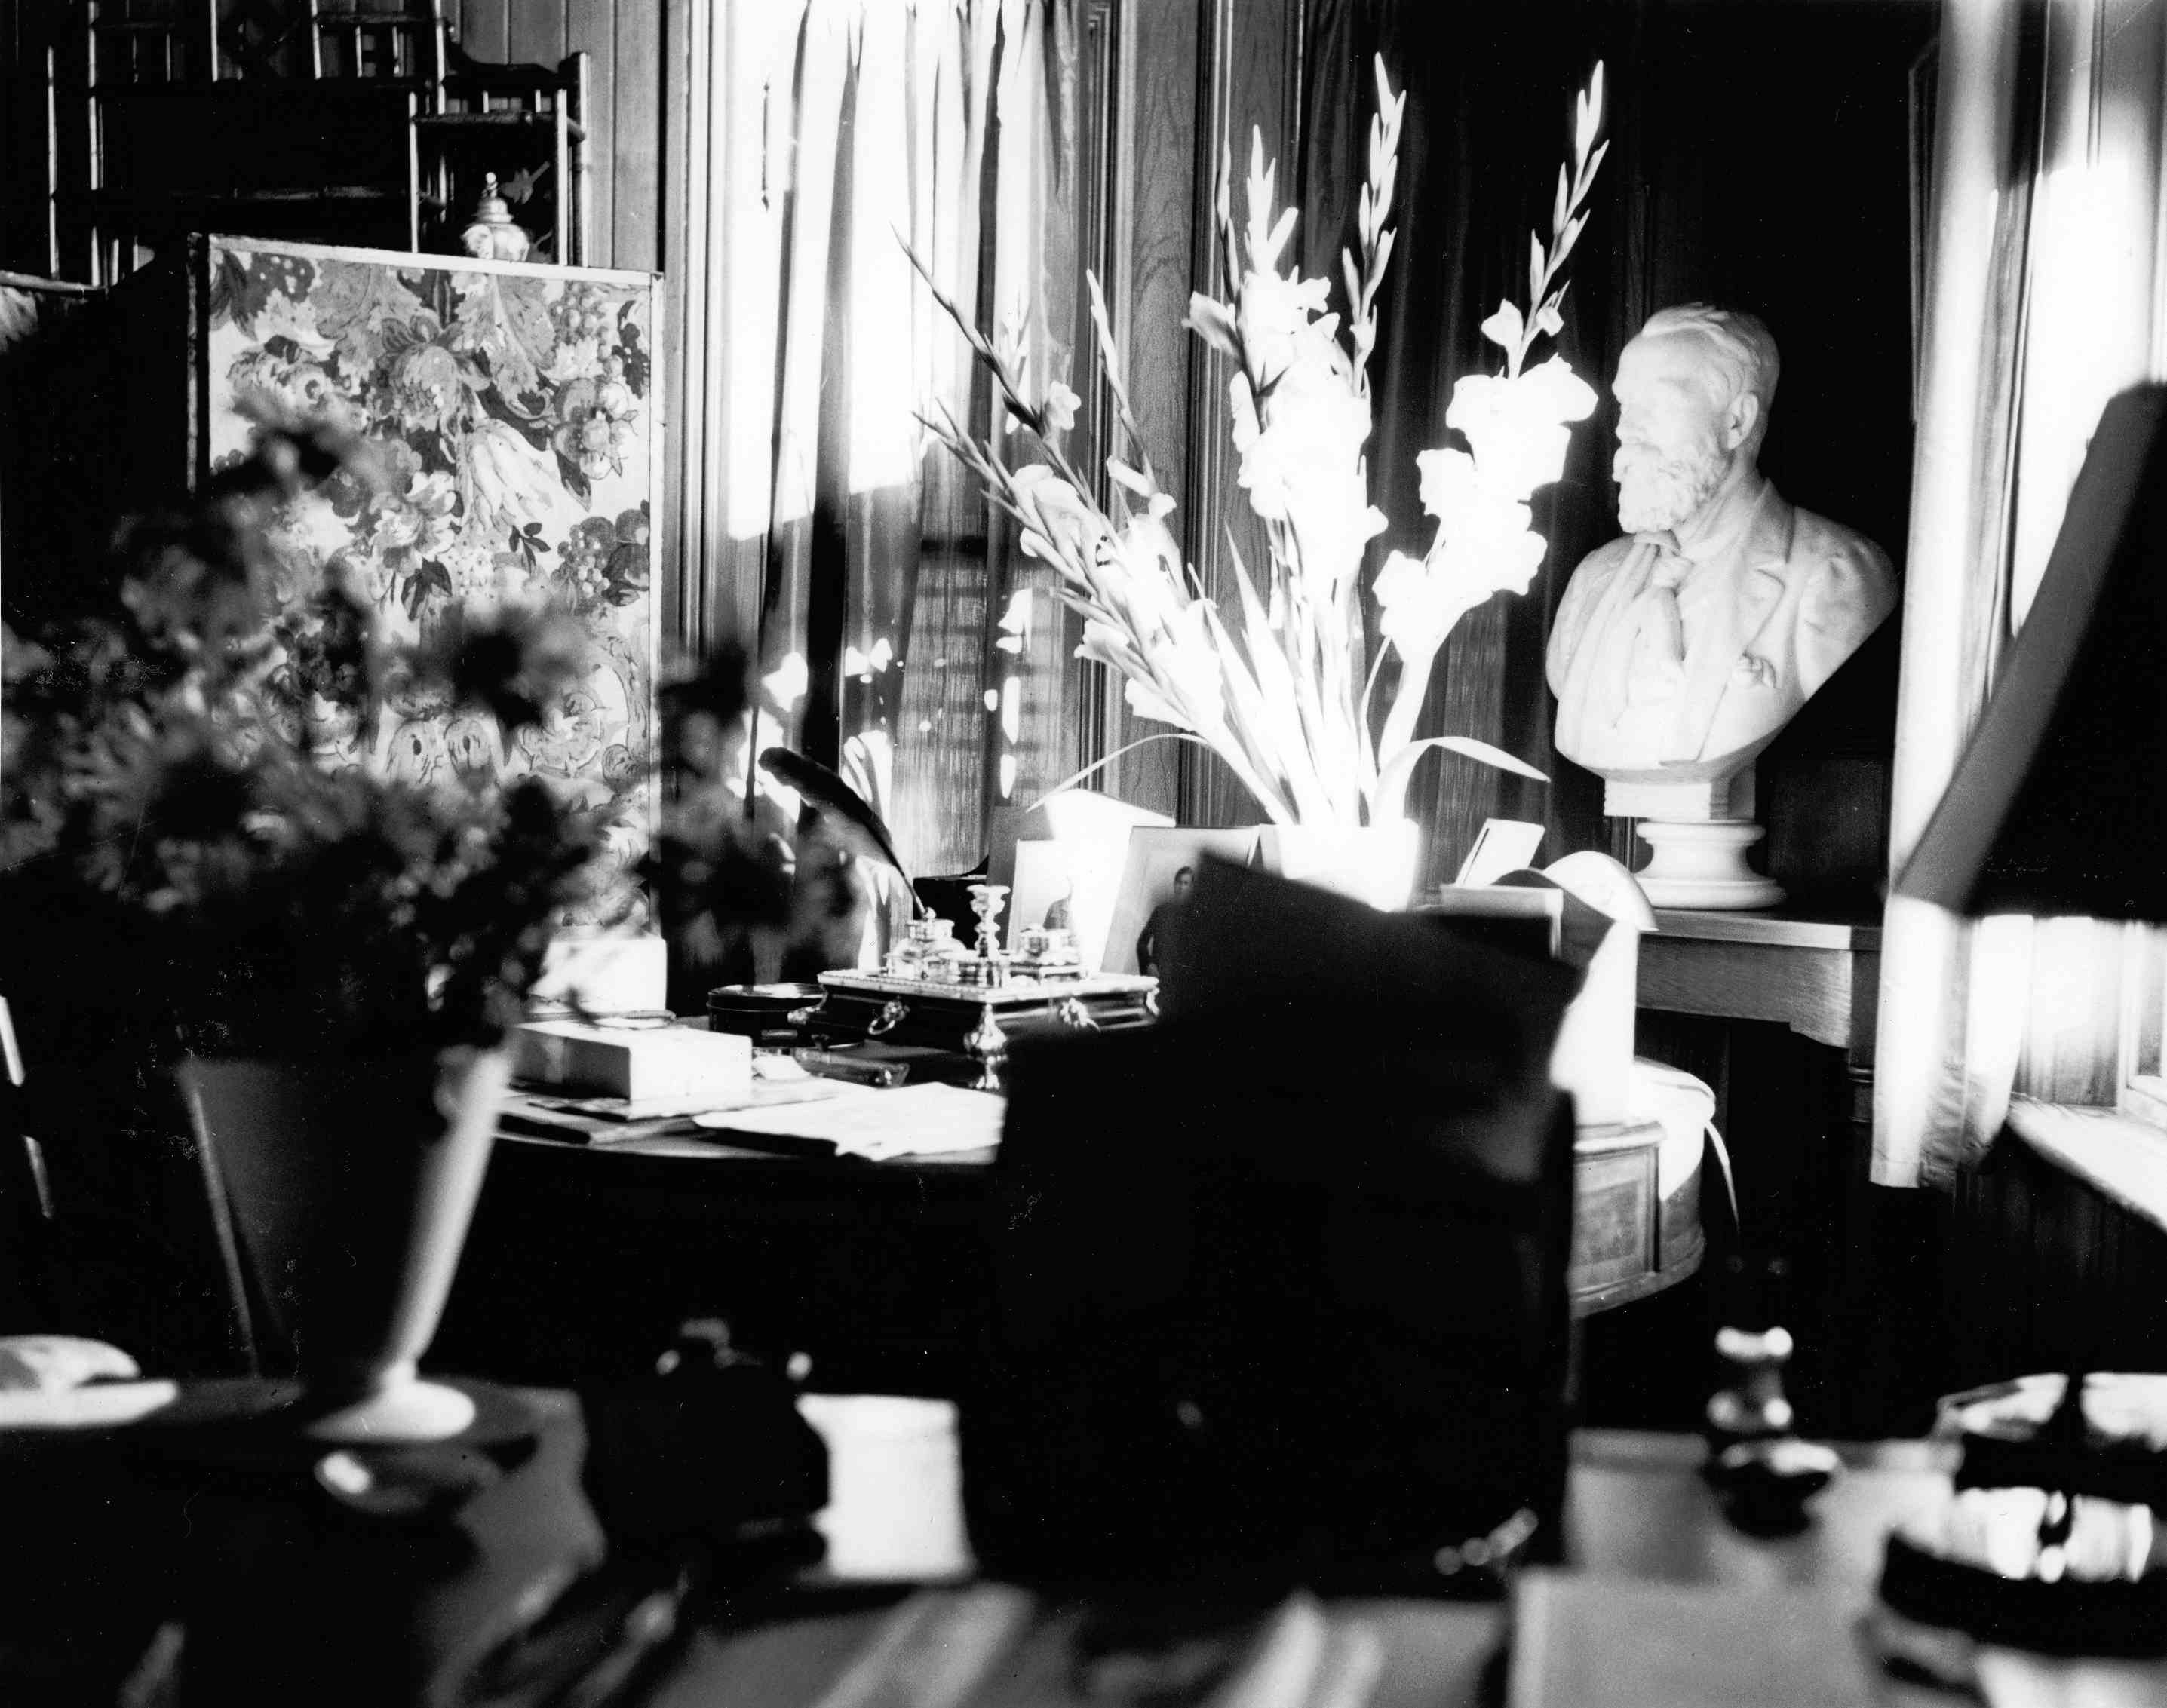 A black and white photograph of an office heavily decorated with knickknacks and flowers.